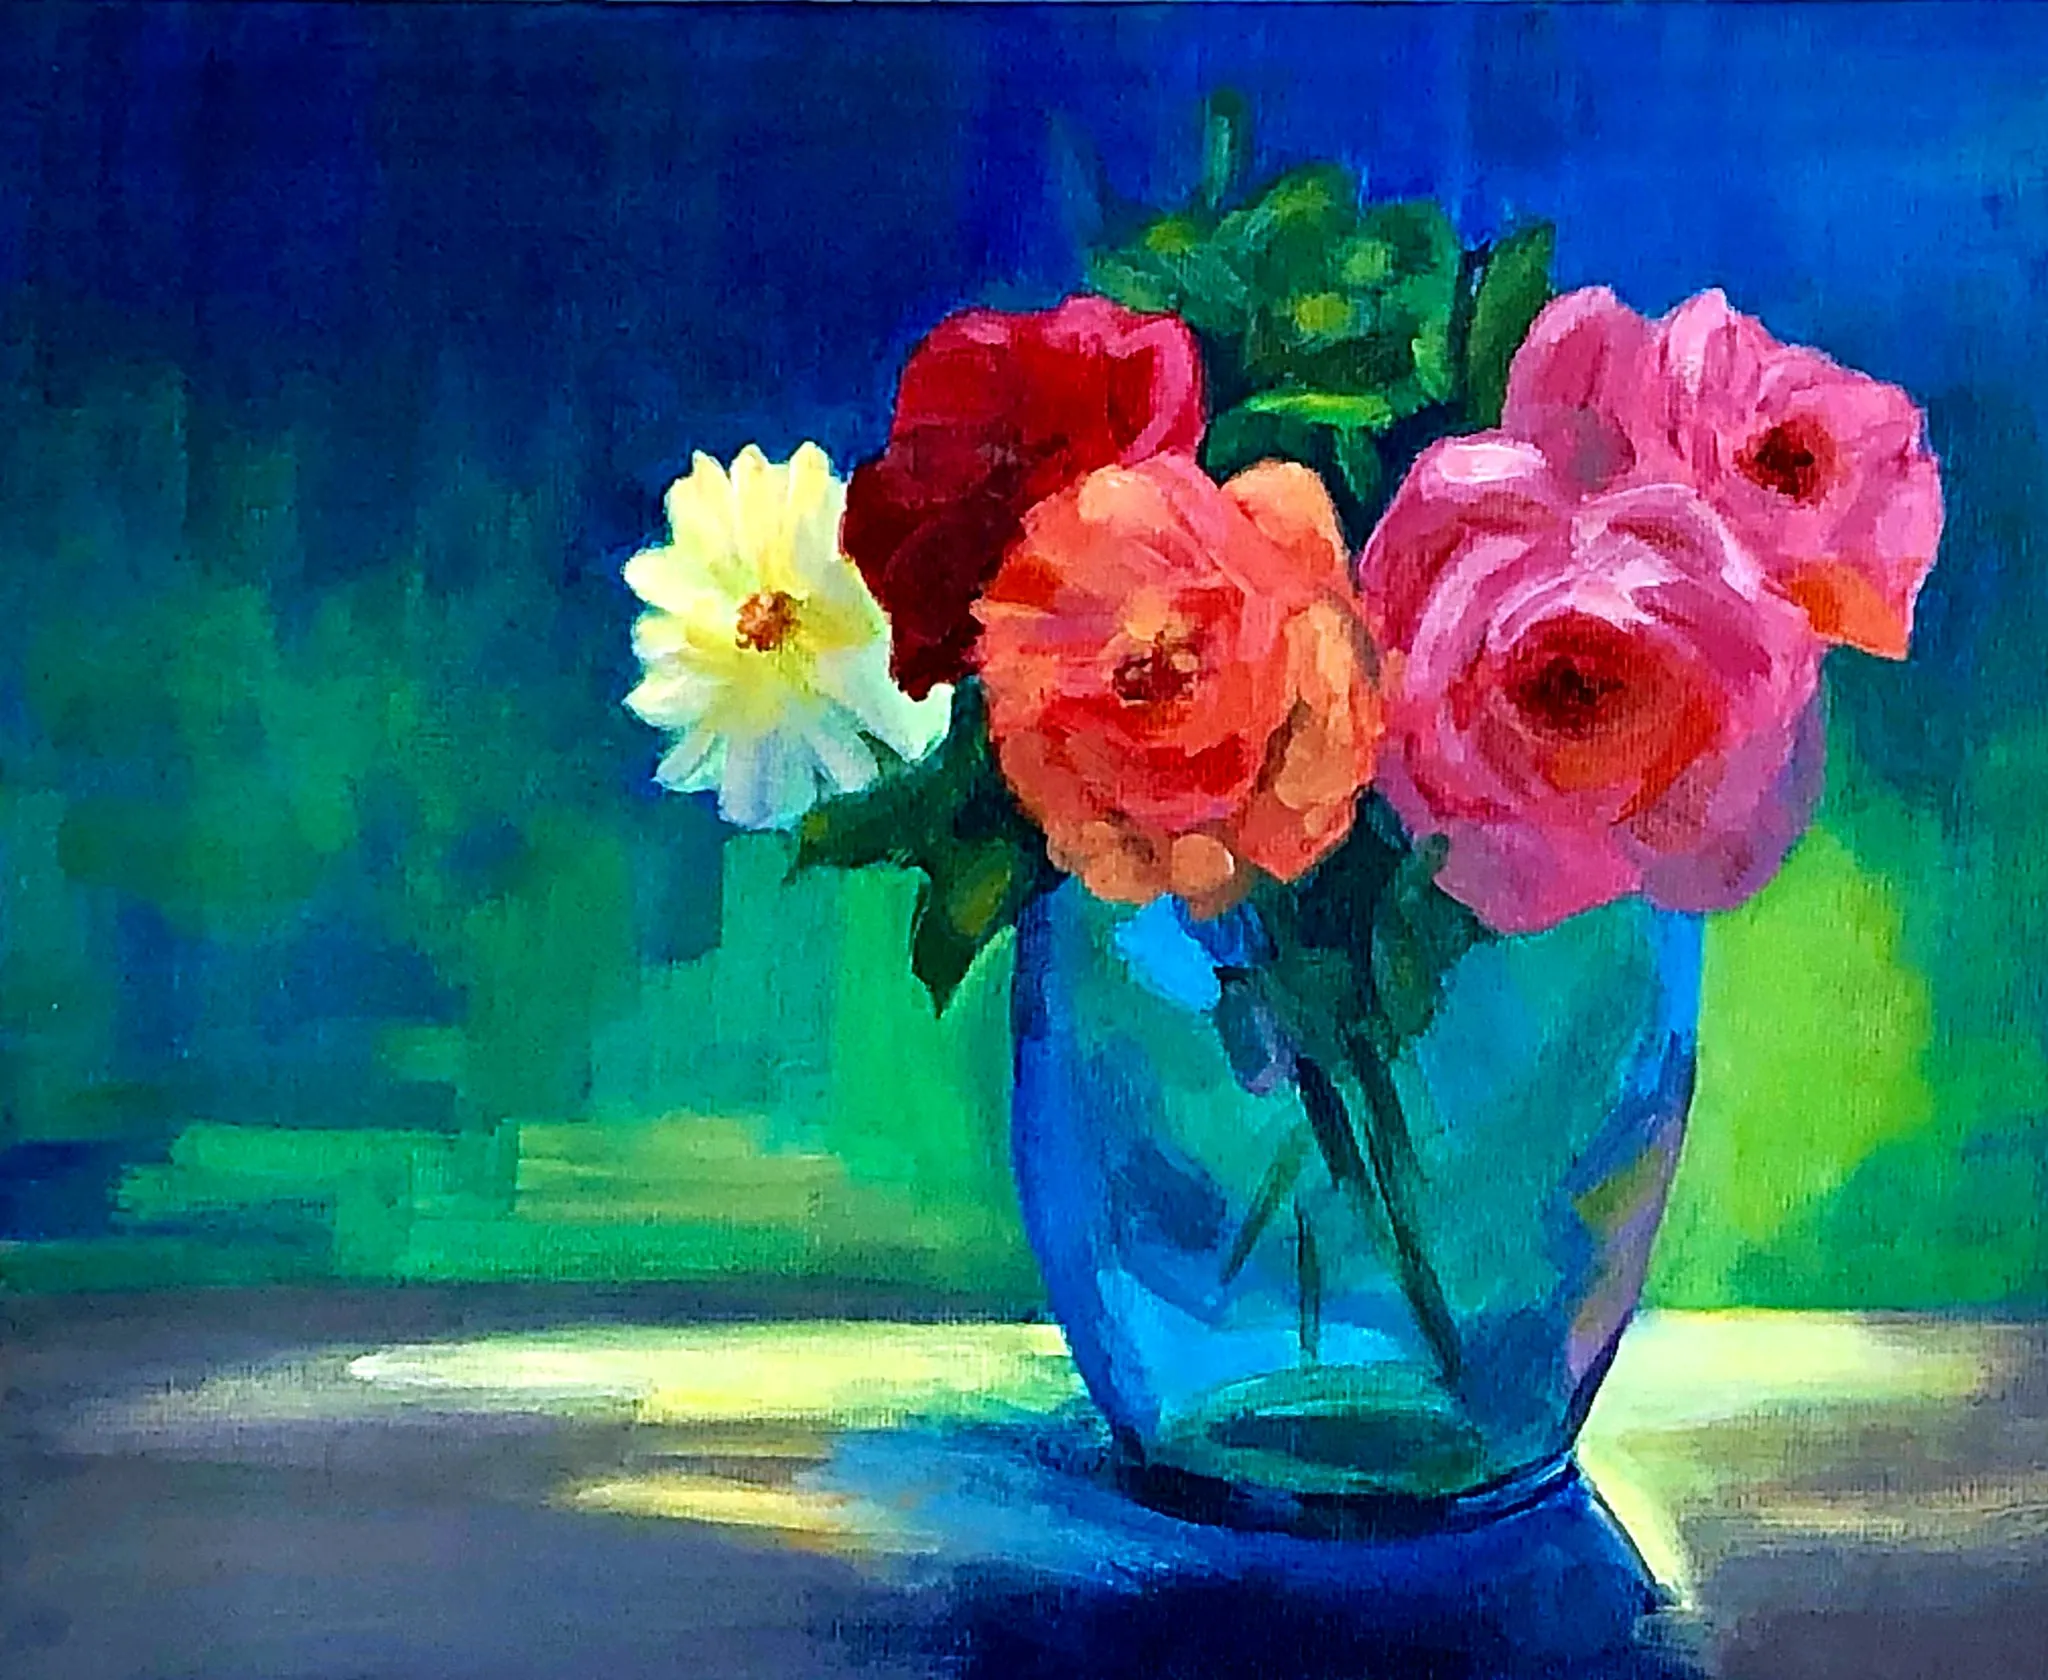 acrylic painting of roses in a vase with green background by artist Shona Jones